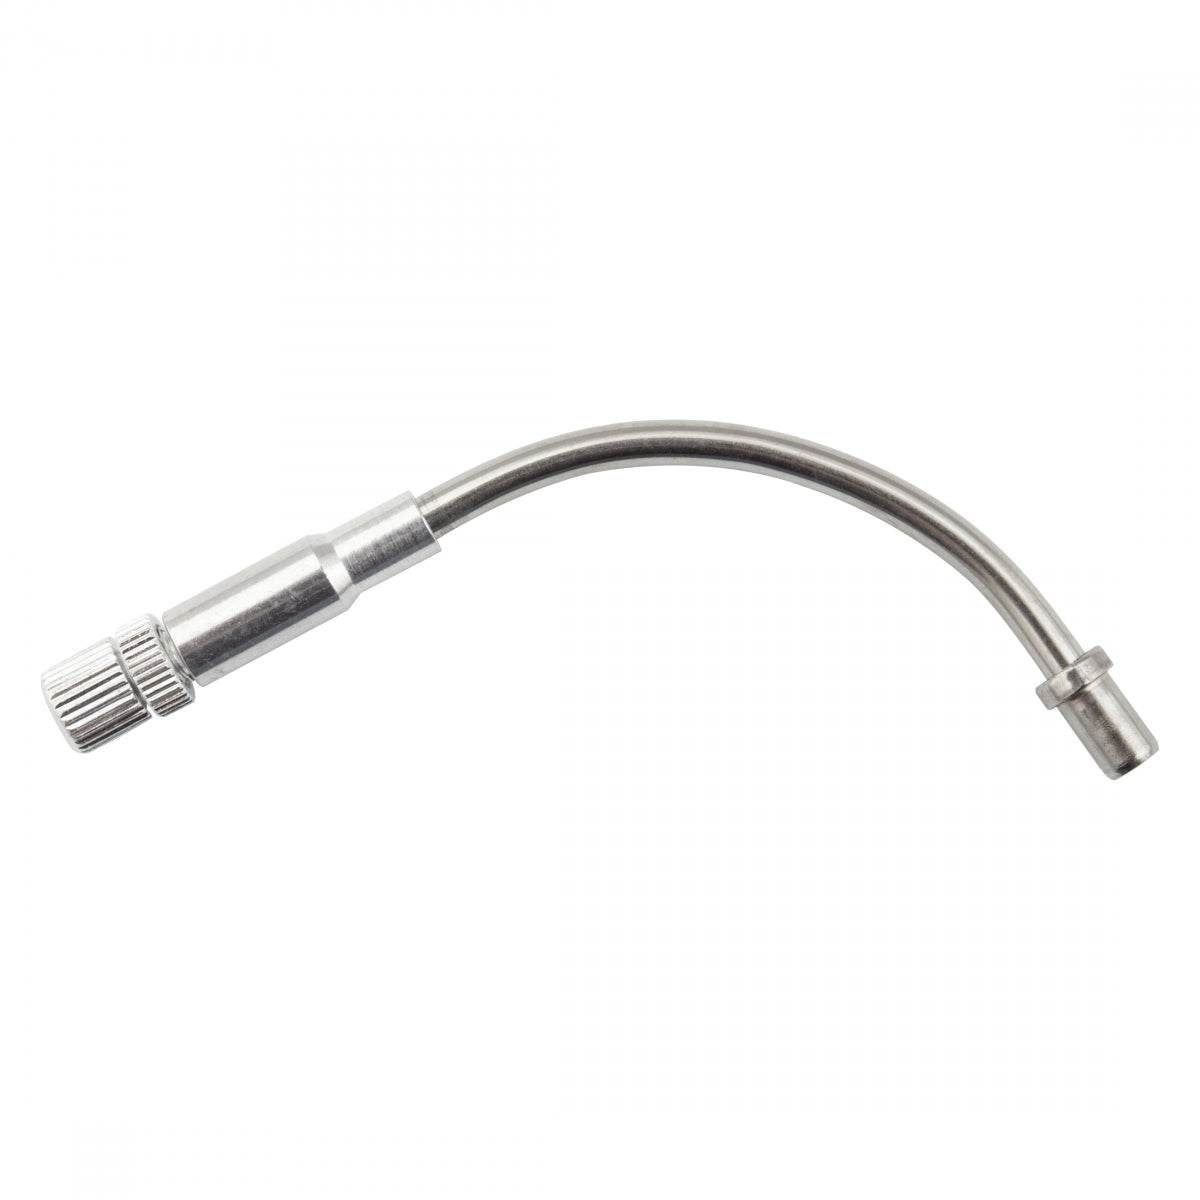 Origin8 V-Brake Cable Noodle with Adjuster, Stainless Steel, 90-Degree